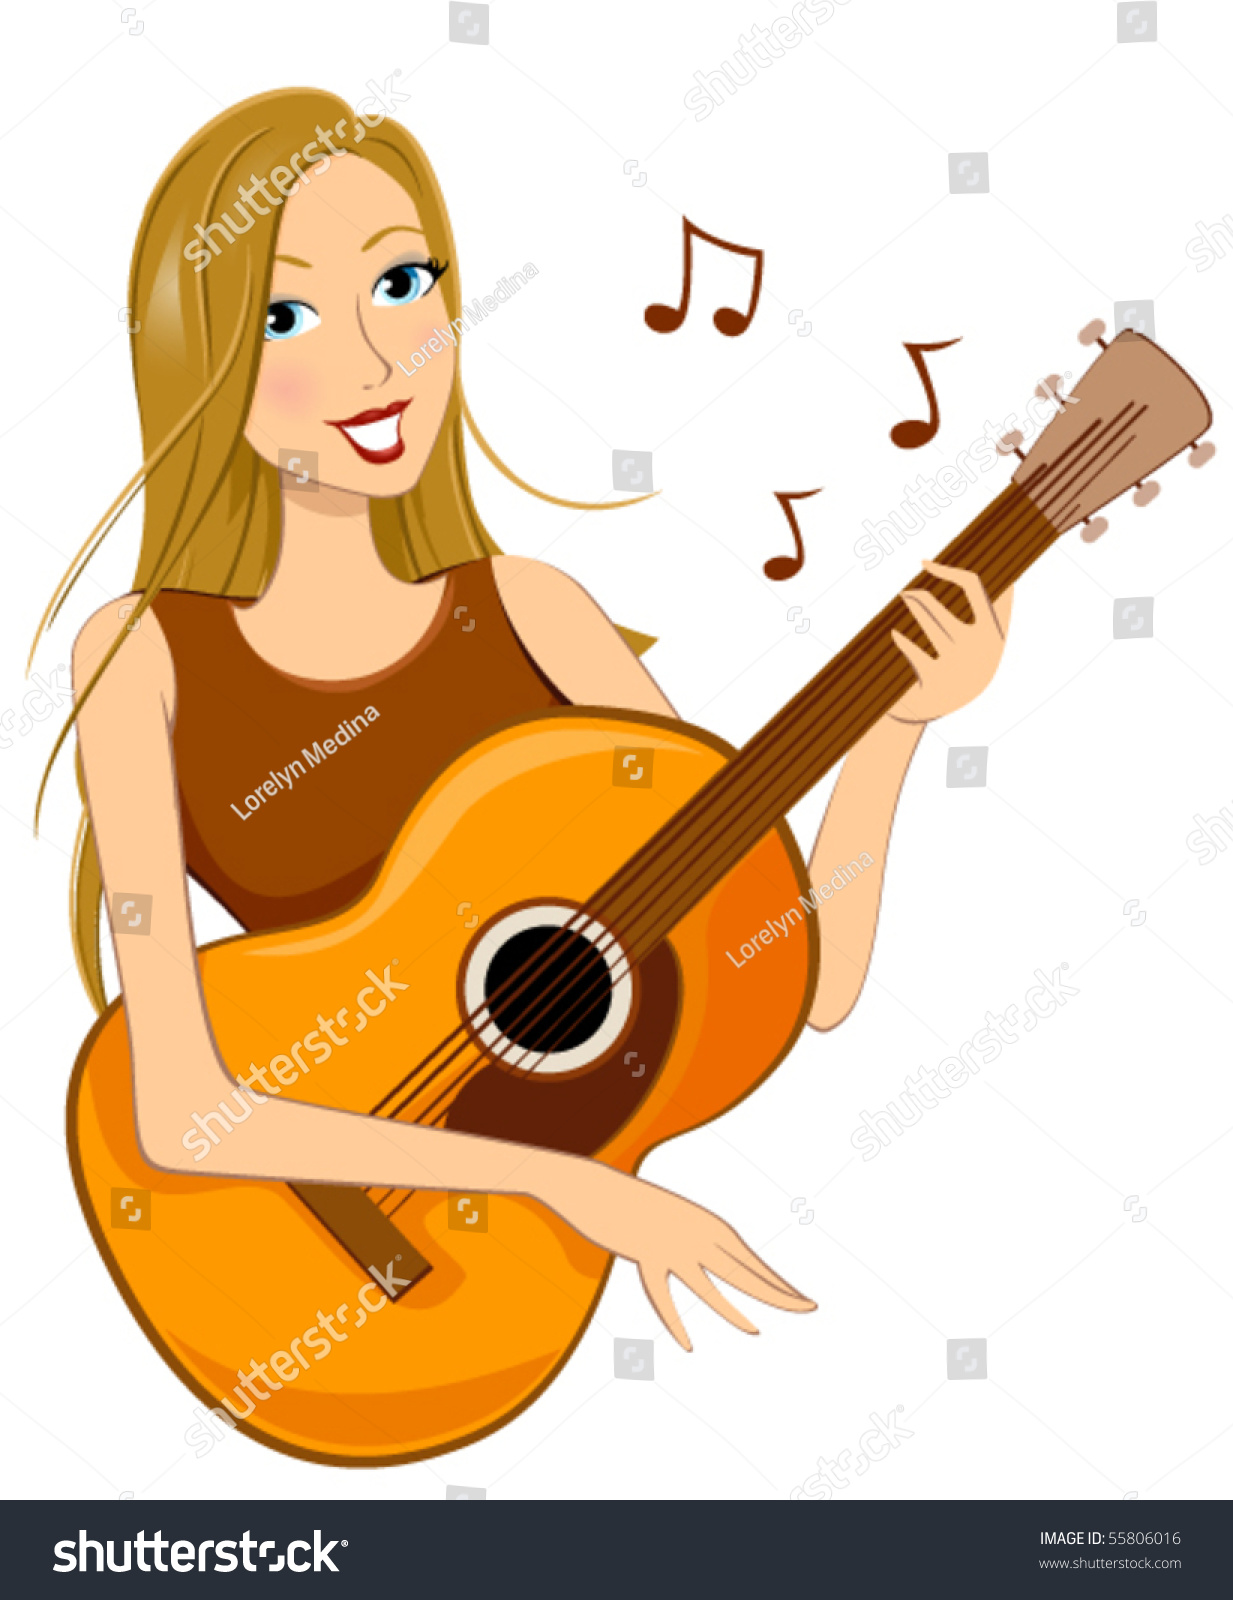 girl playing guitar clipart - photo #11